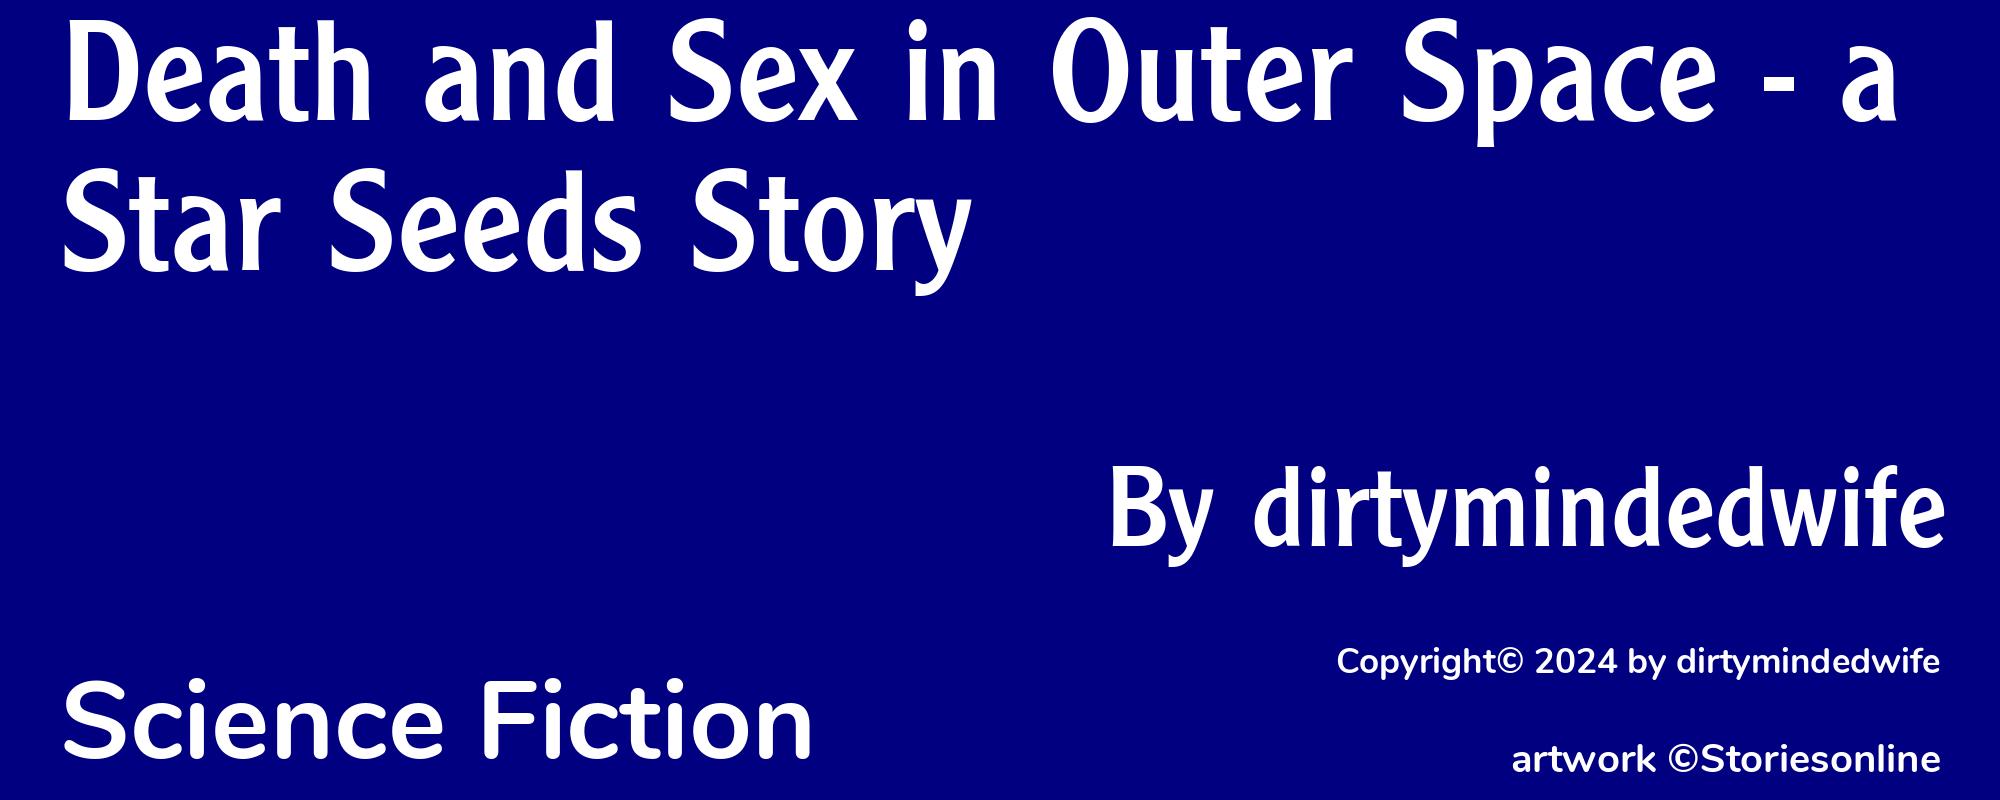 Death and Sex in Outer Space - a Star Seeds Story - Cover